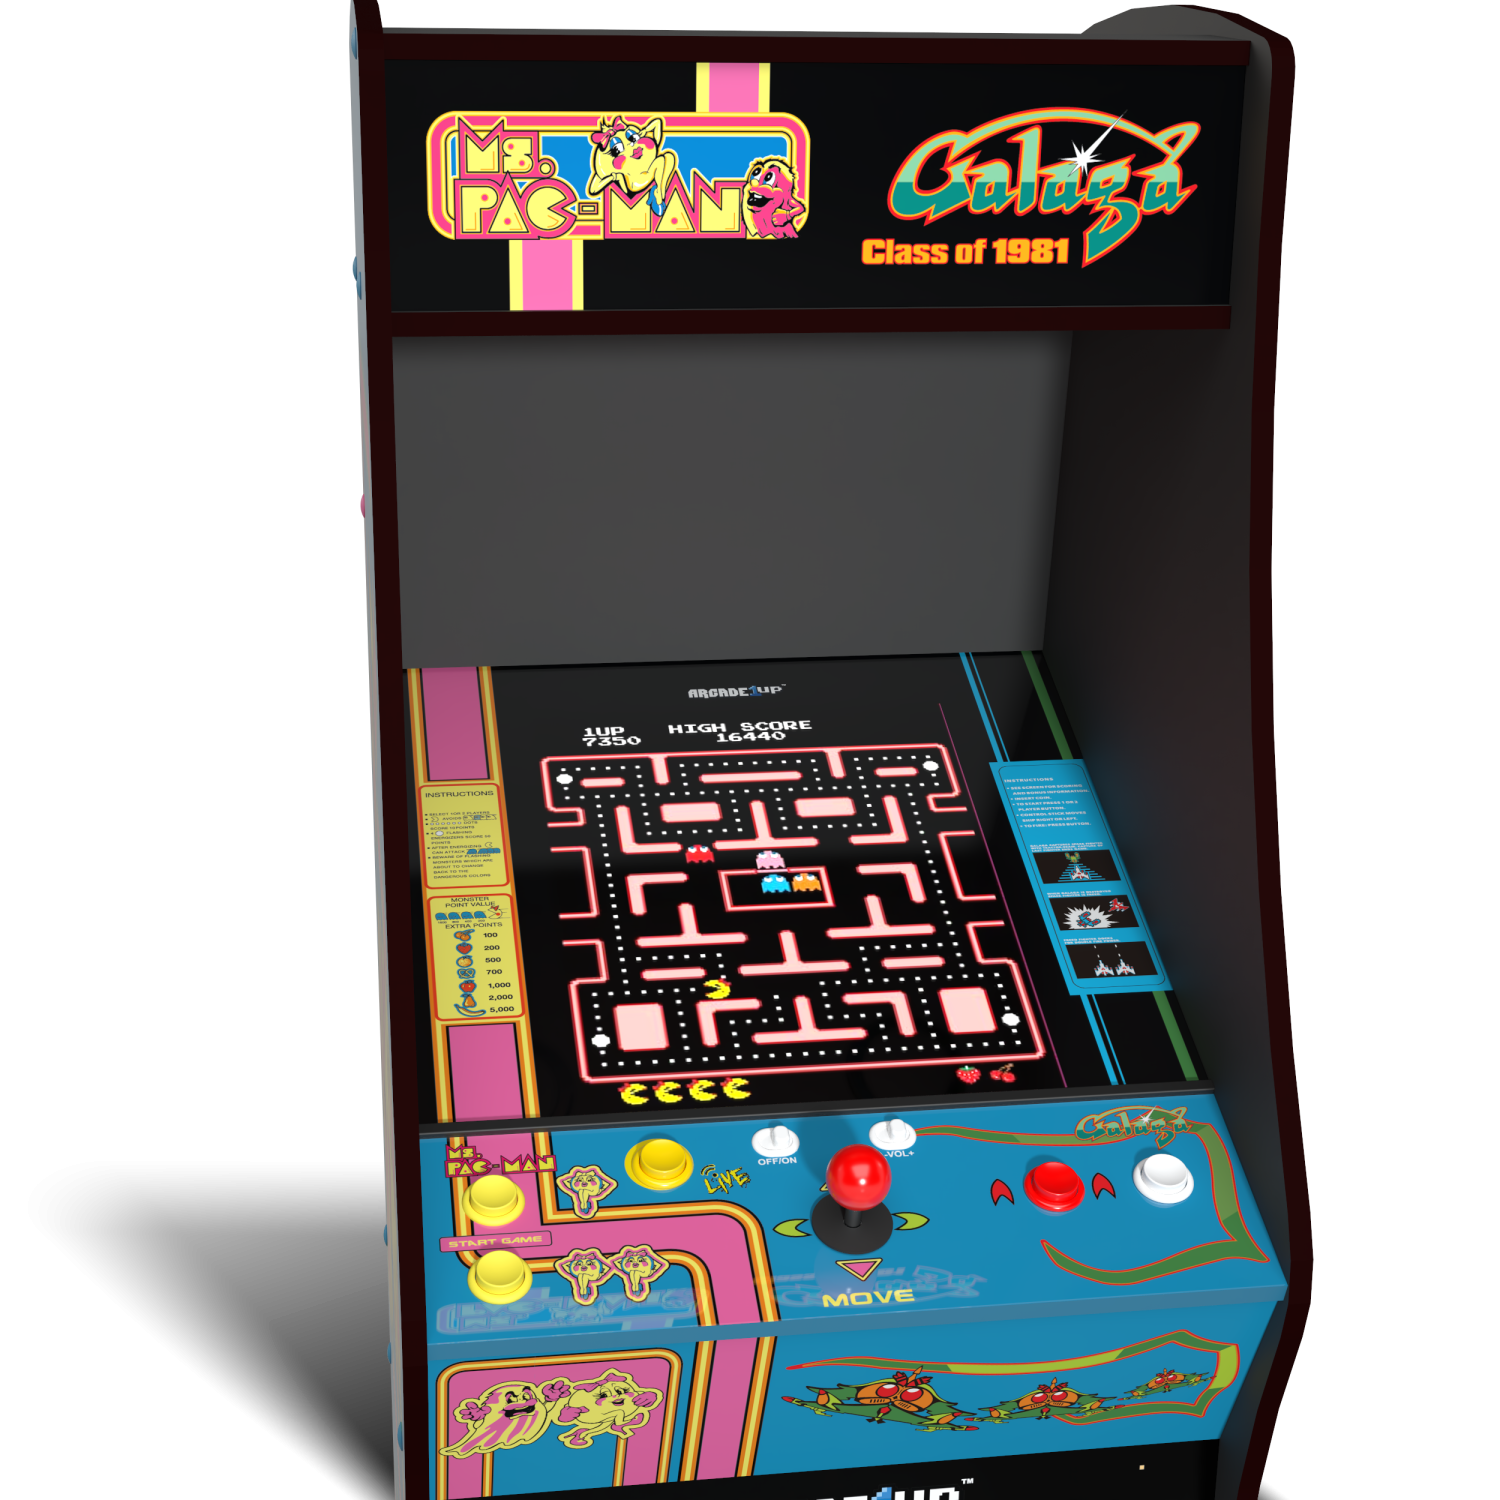 ARCADE 1 UP MS. PAC-MAN VS GALAGA CLASS OF 81 DELUXE ARCADE MACHINE